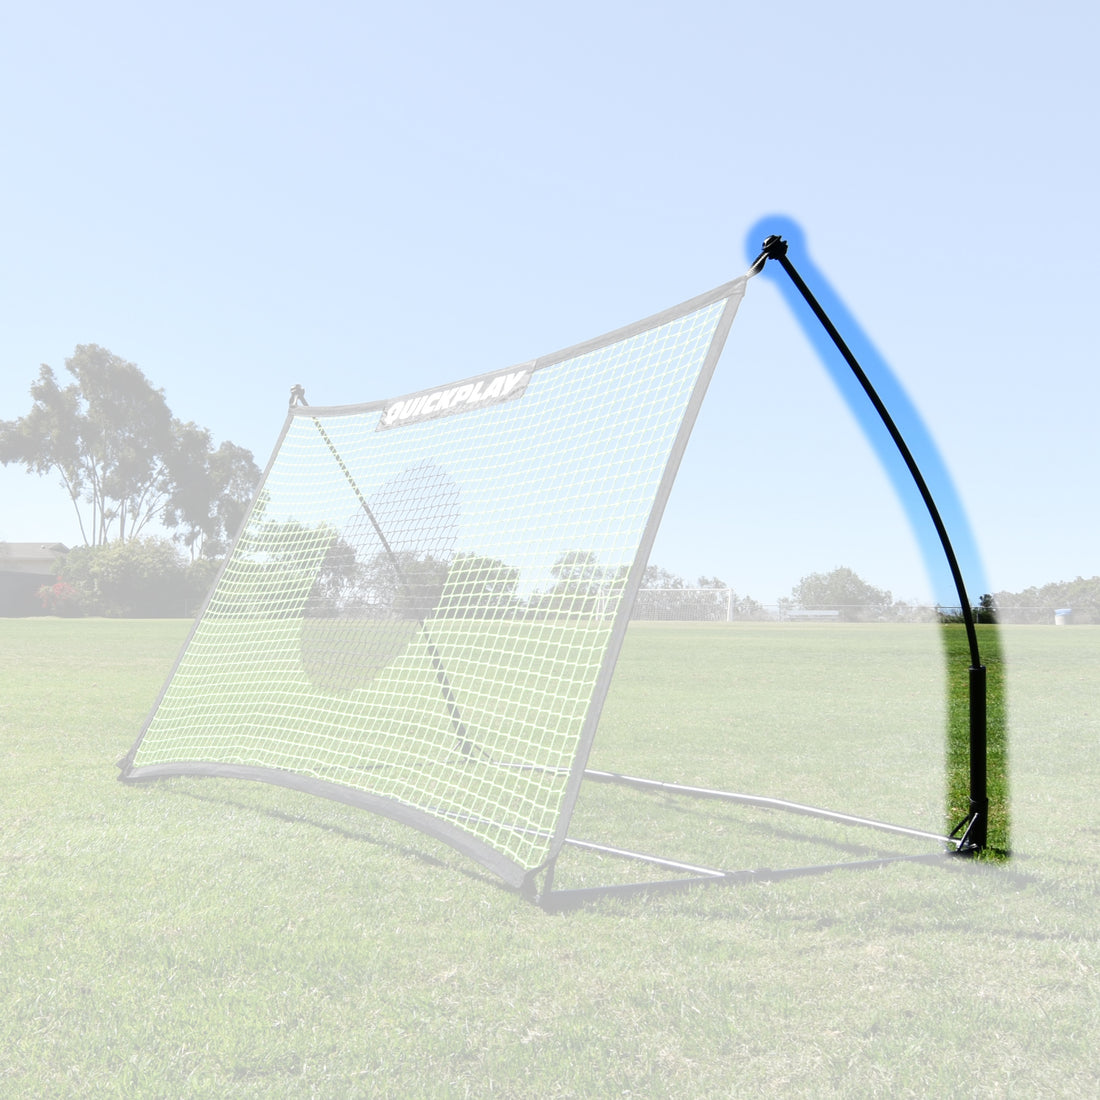 SPARE PART - UPRIGHT - TEKKERS REBOUNDER 5X3' - QUICKPLAY UK -